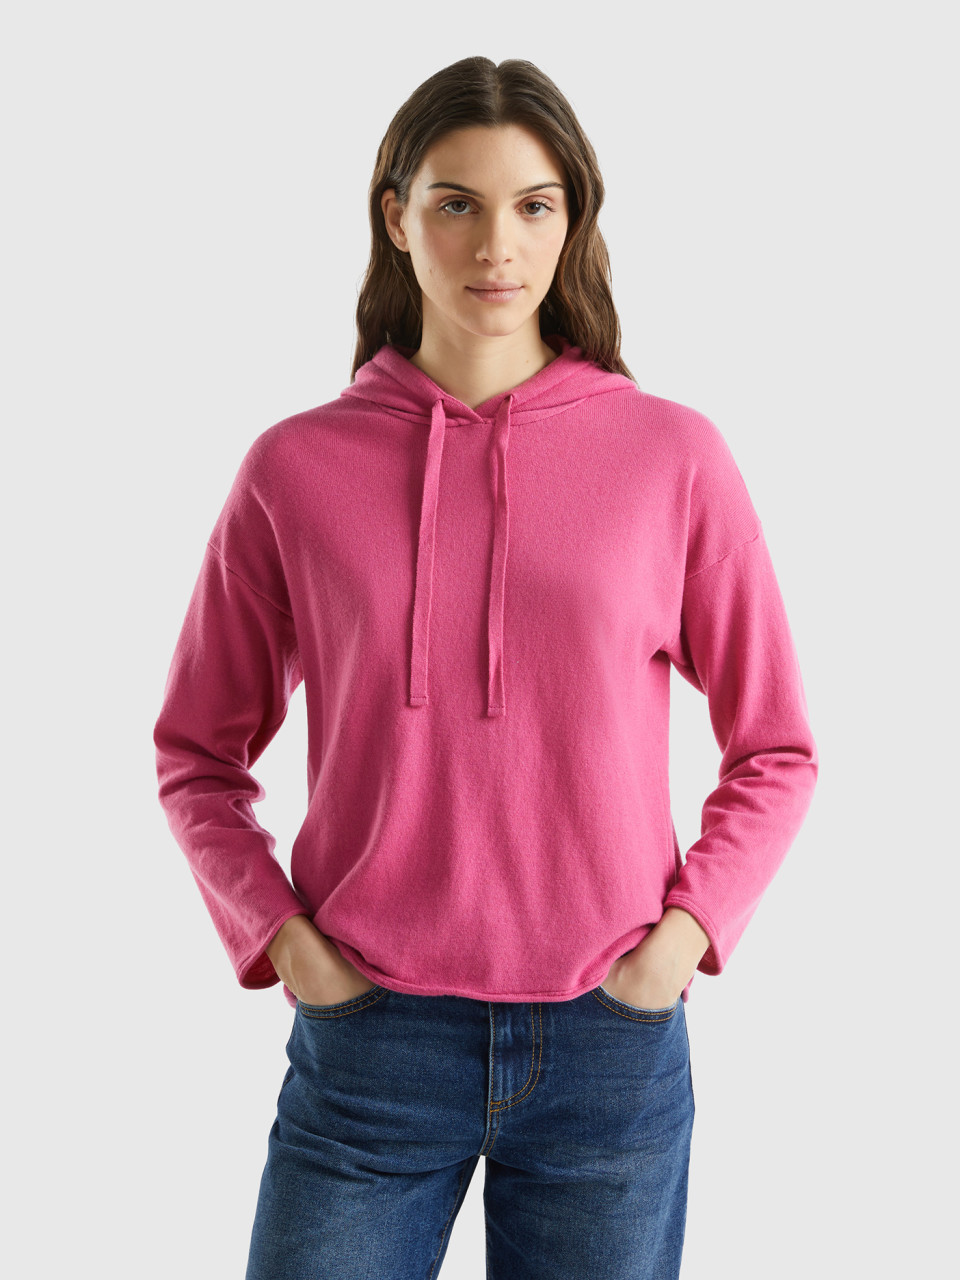 Benetton, Pink Cashmere Blend Sweater With Hood, Pink, Women